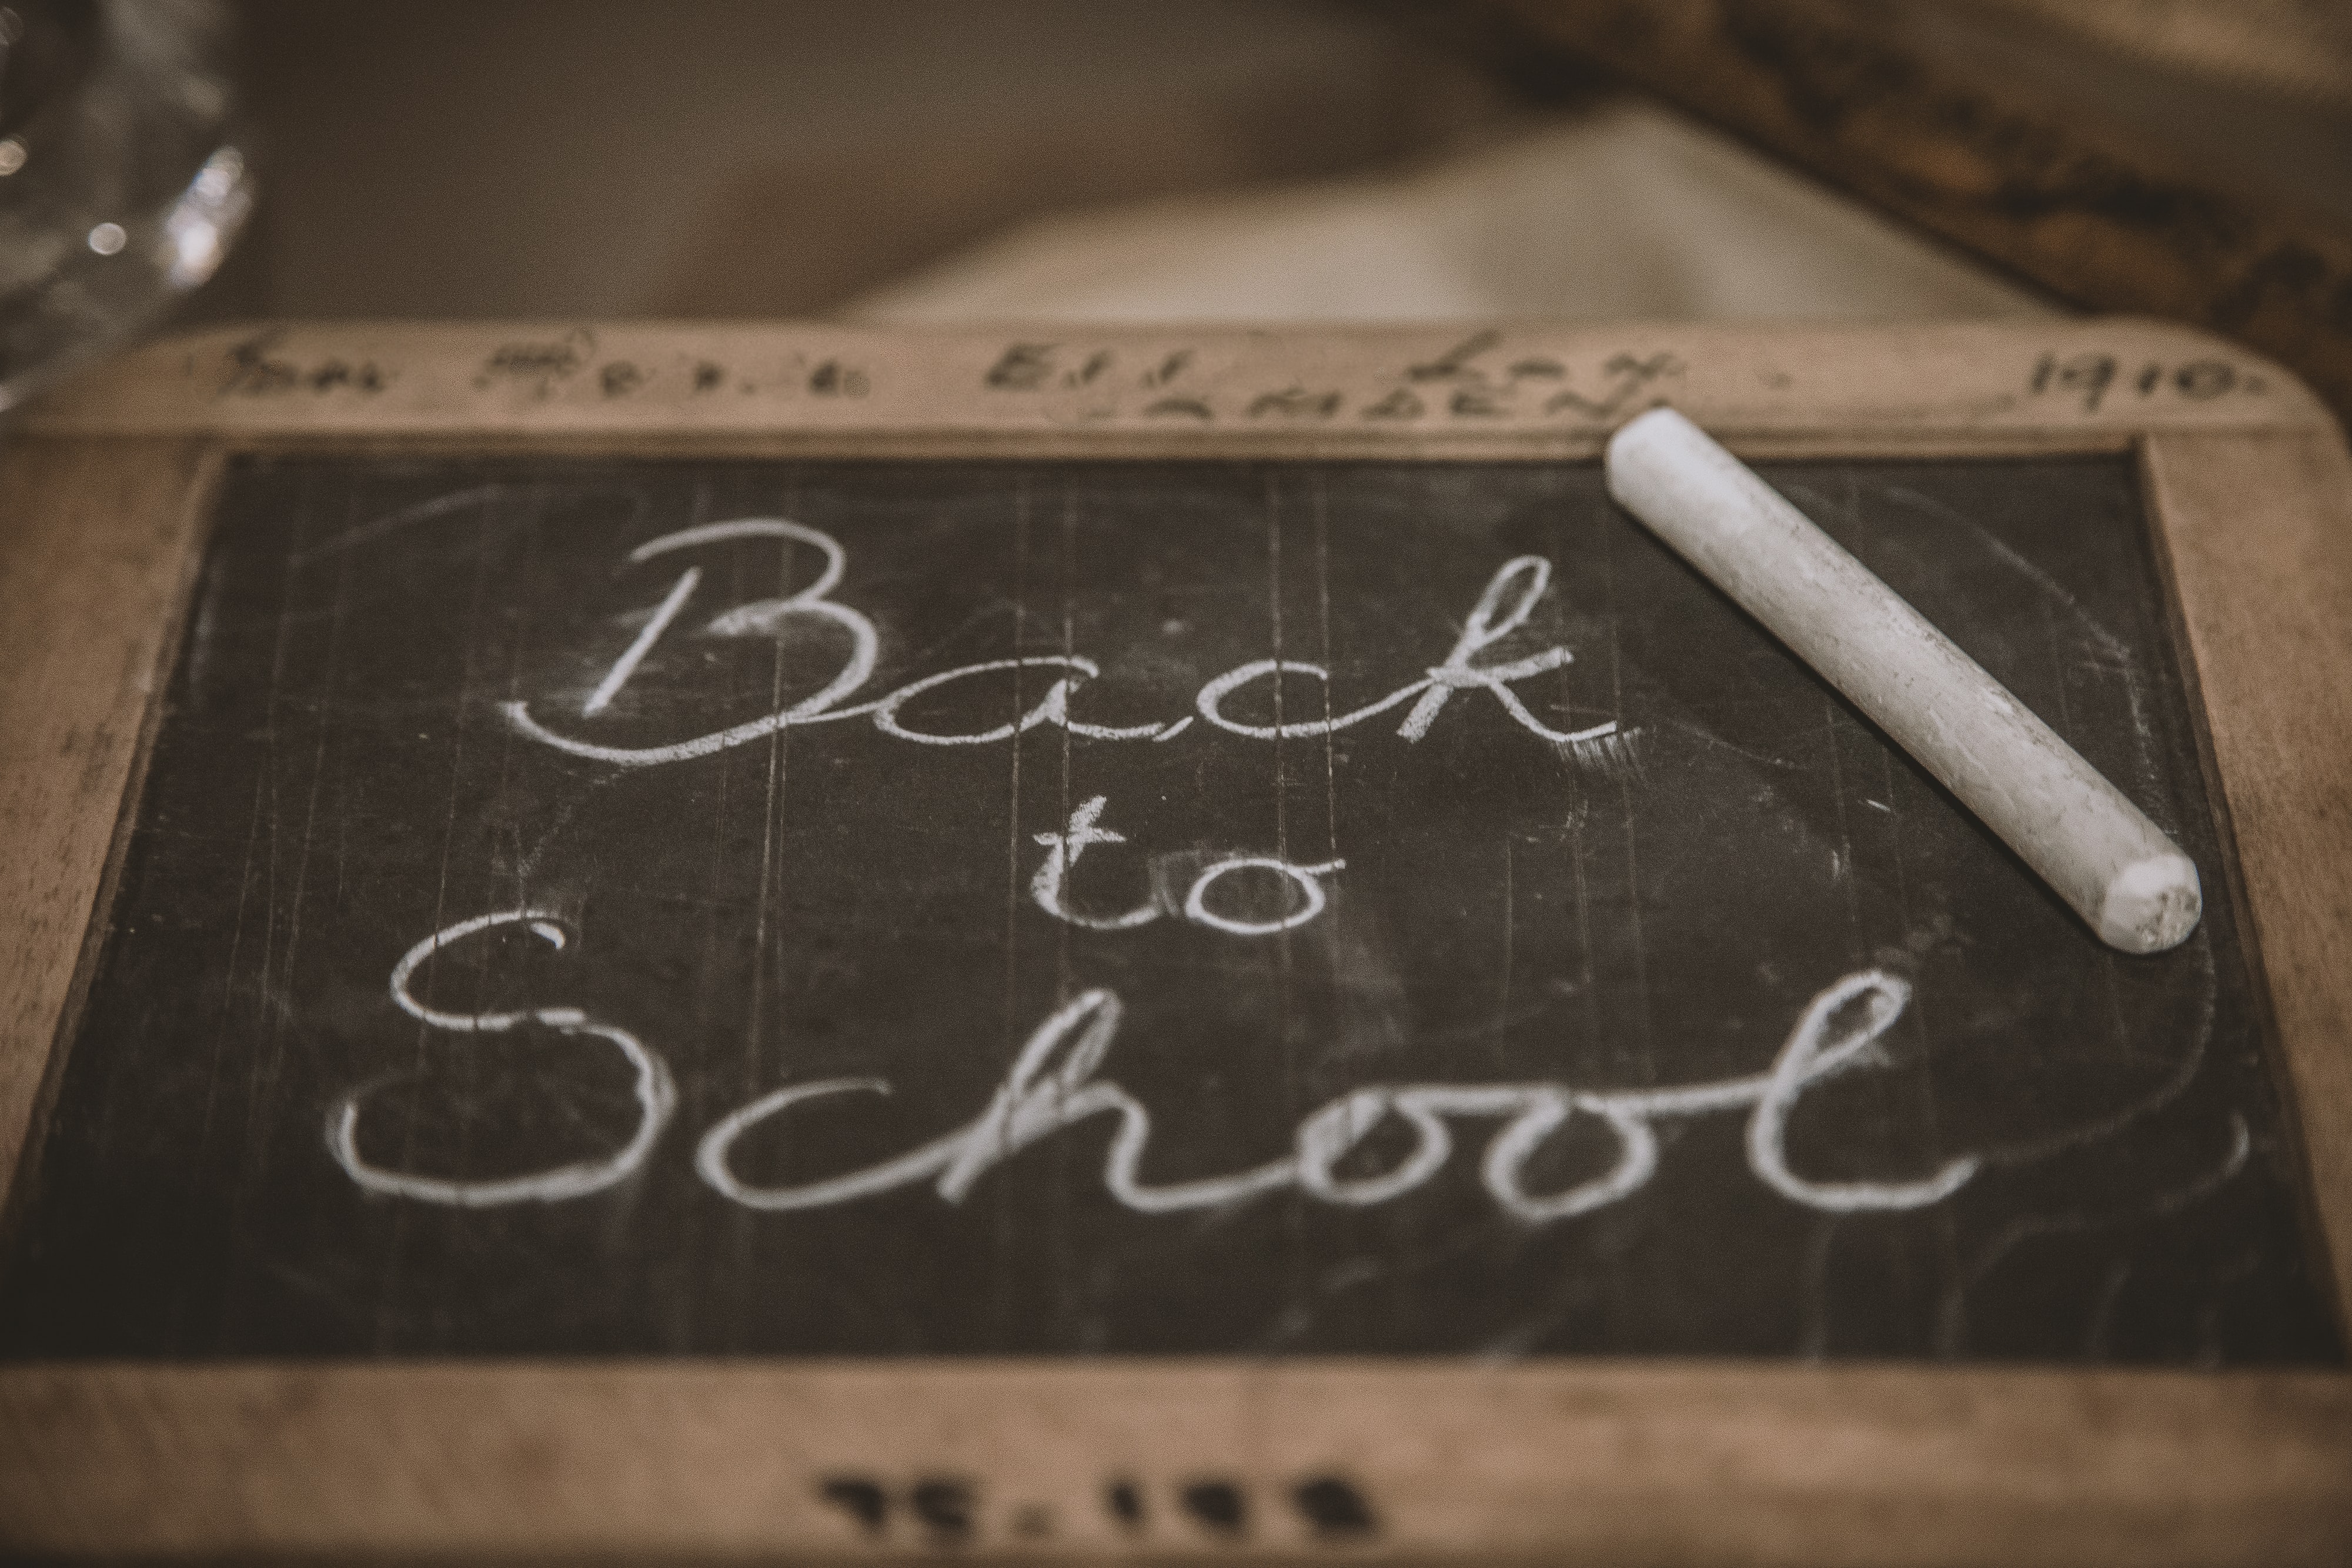 Back to school 2014